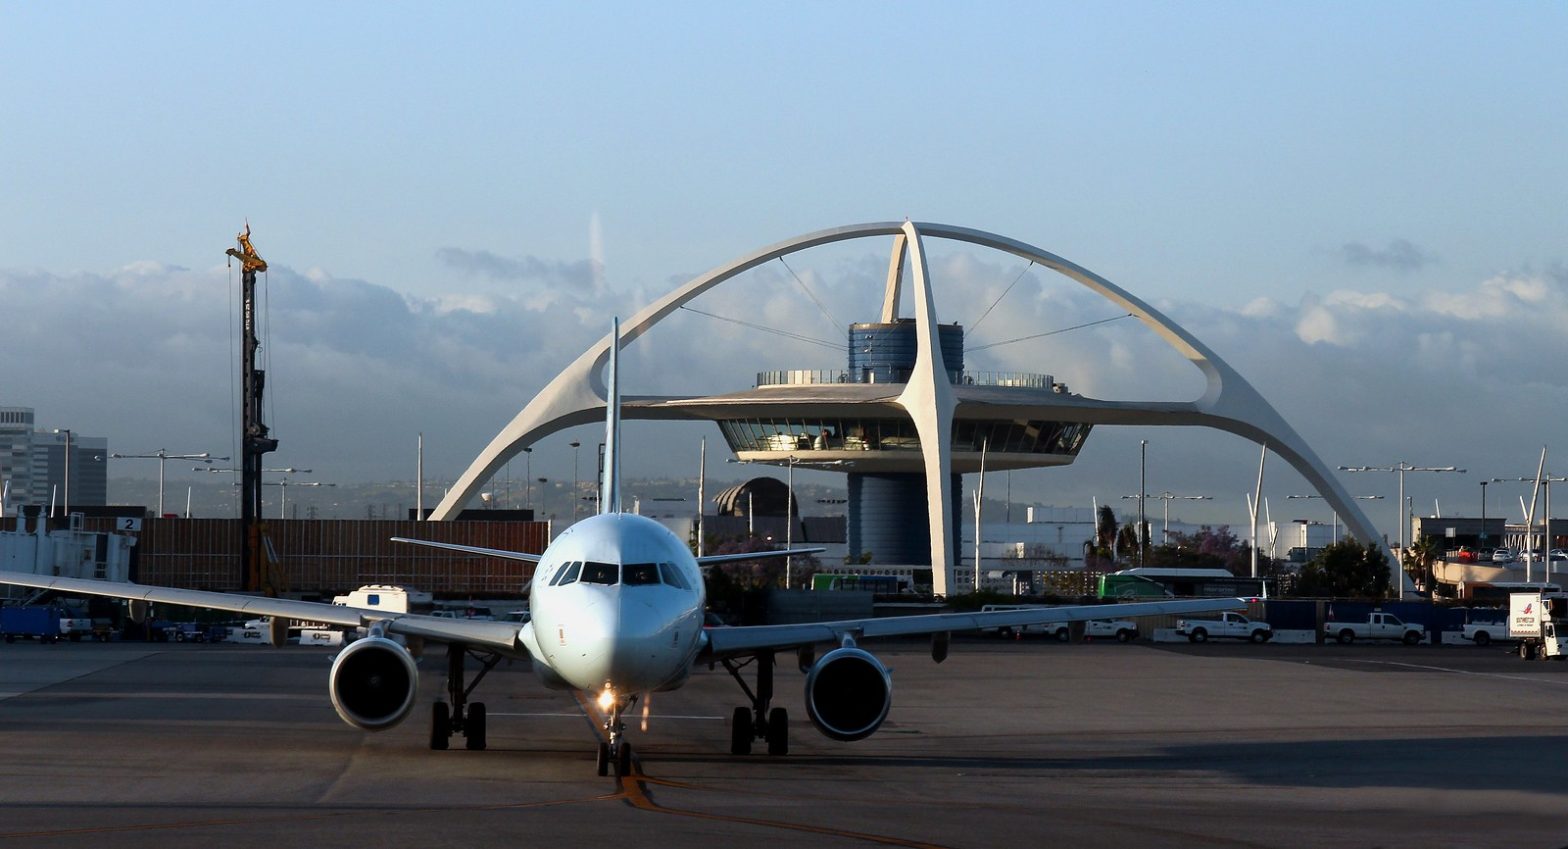 LAX Airport Parking Guide